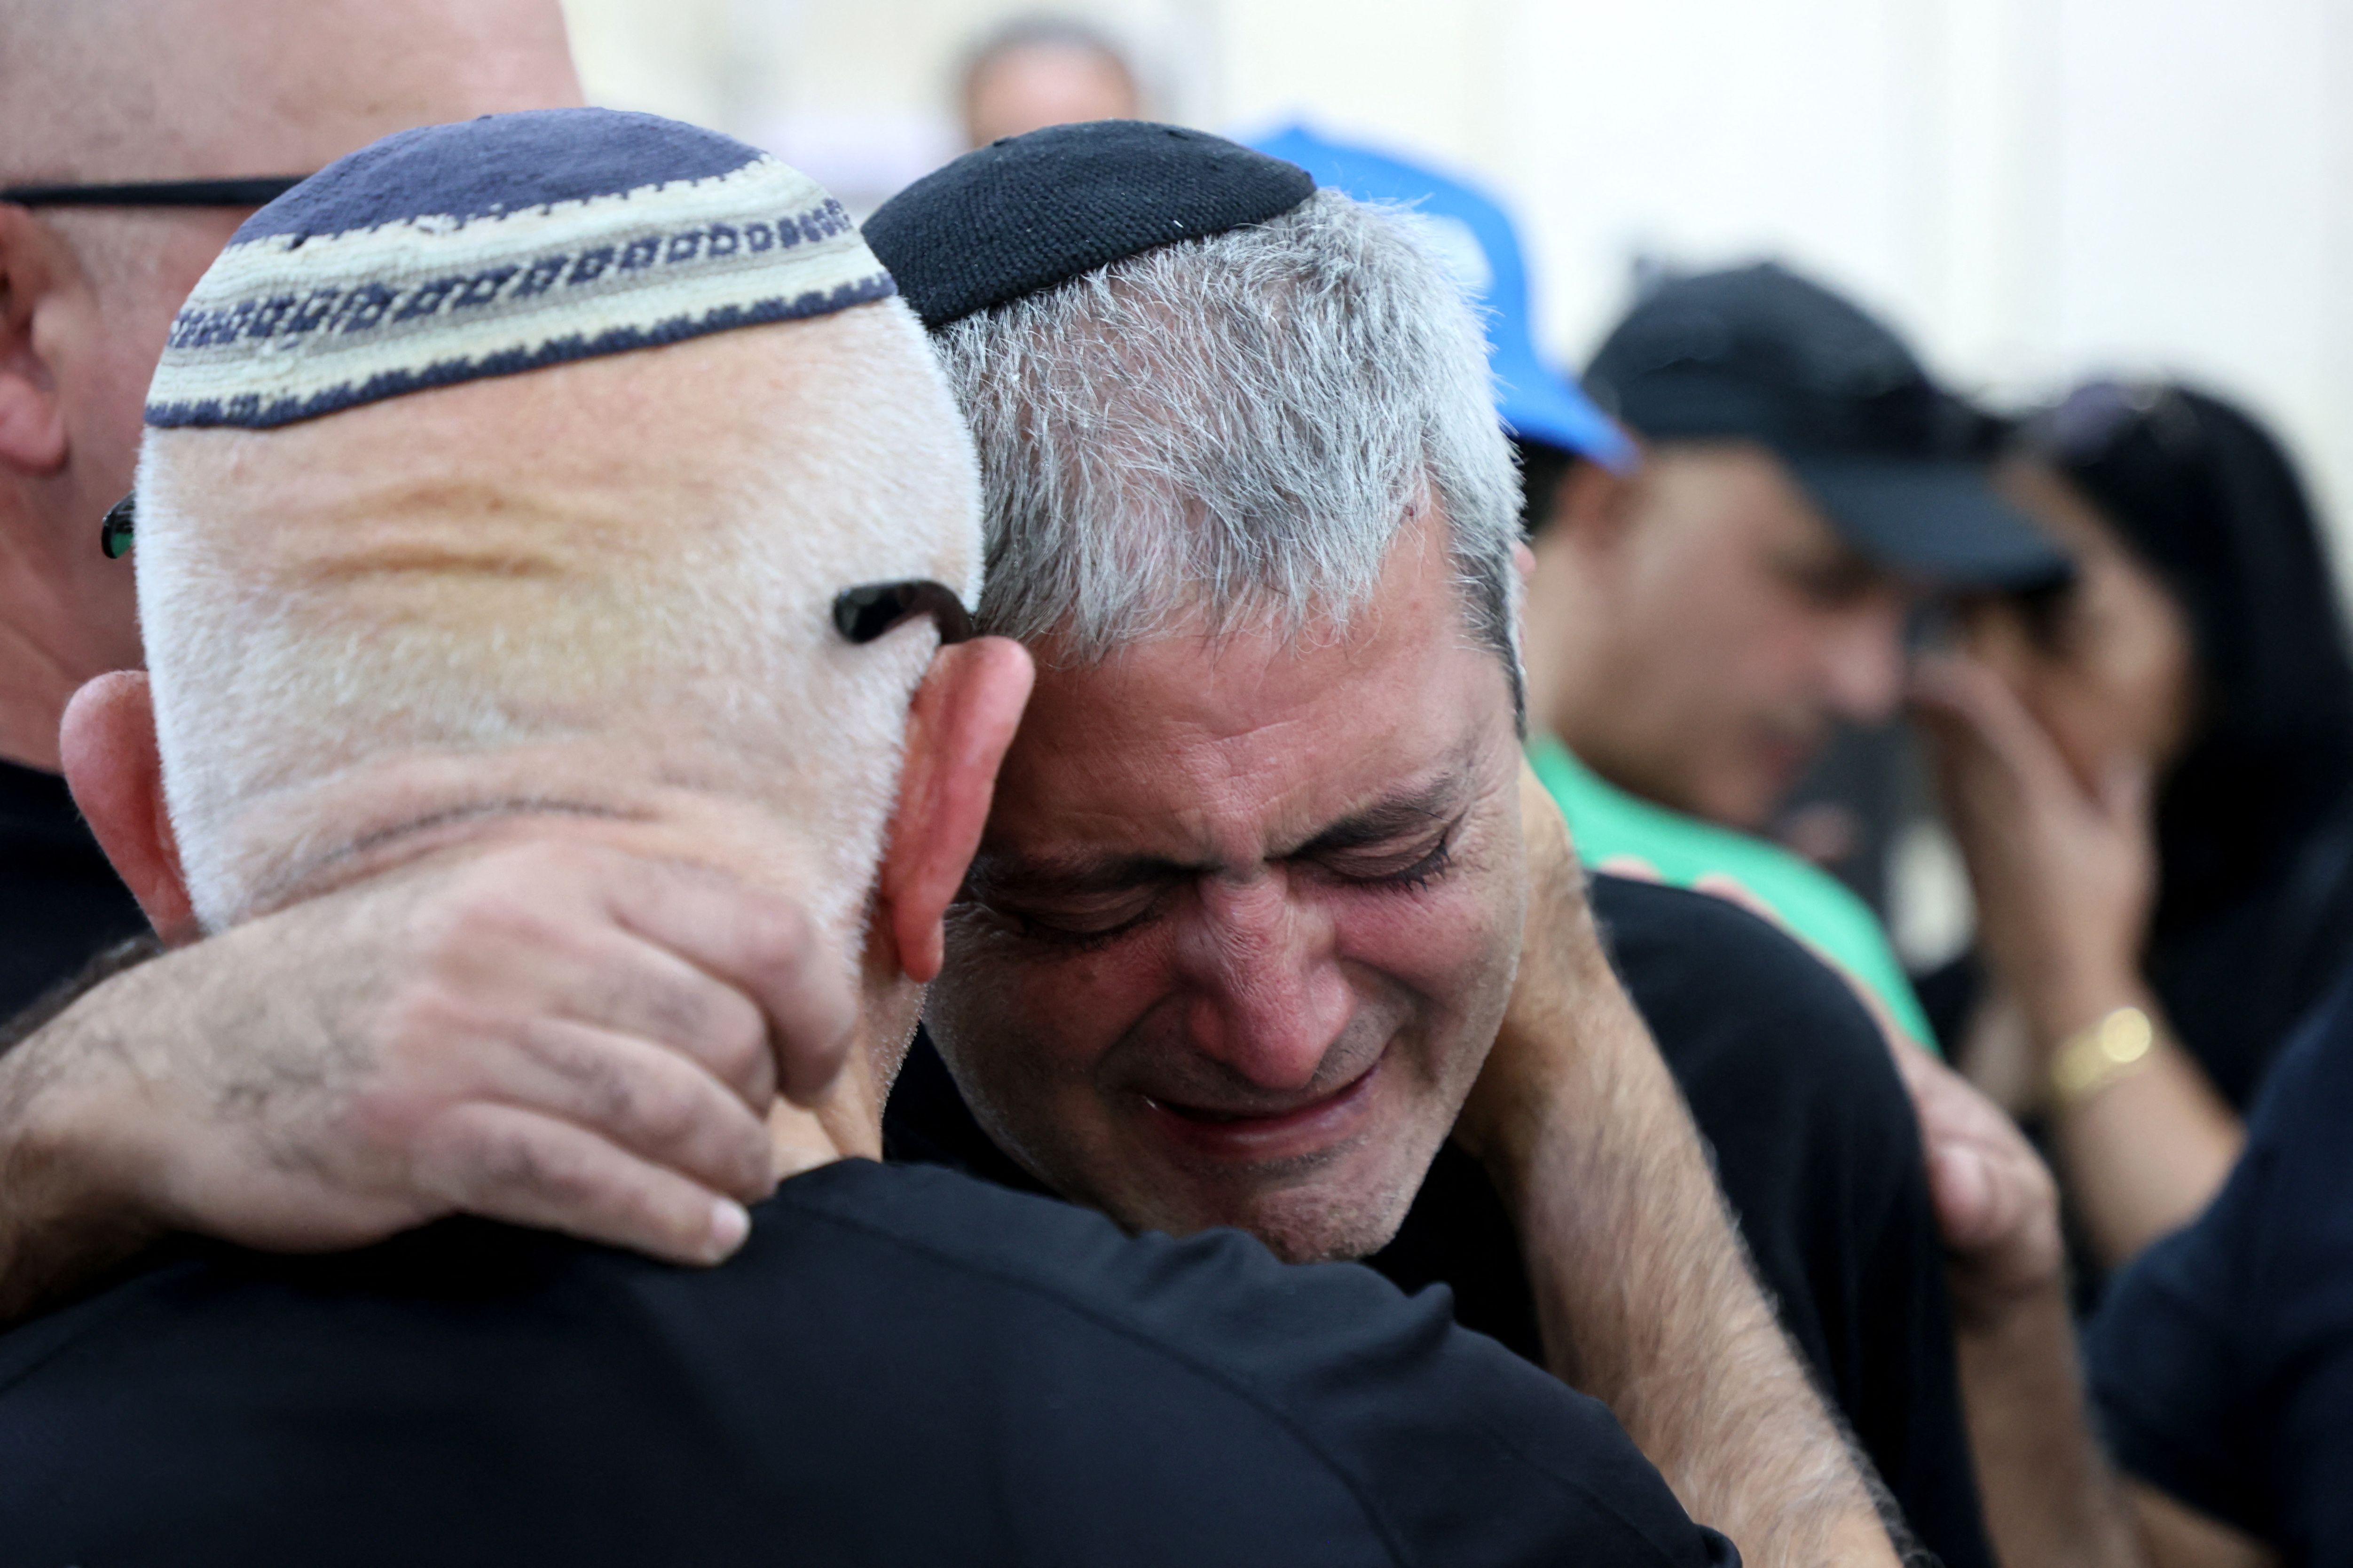 The father of Naor Hassisim is comforted during his son's funeral, a victim of the Kibbutz Kfar Aza attack last week by members of the Palestinian militant group Hamas, at a cemetery, in southern Israeli city of Ashdod